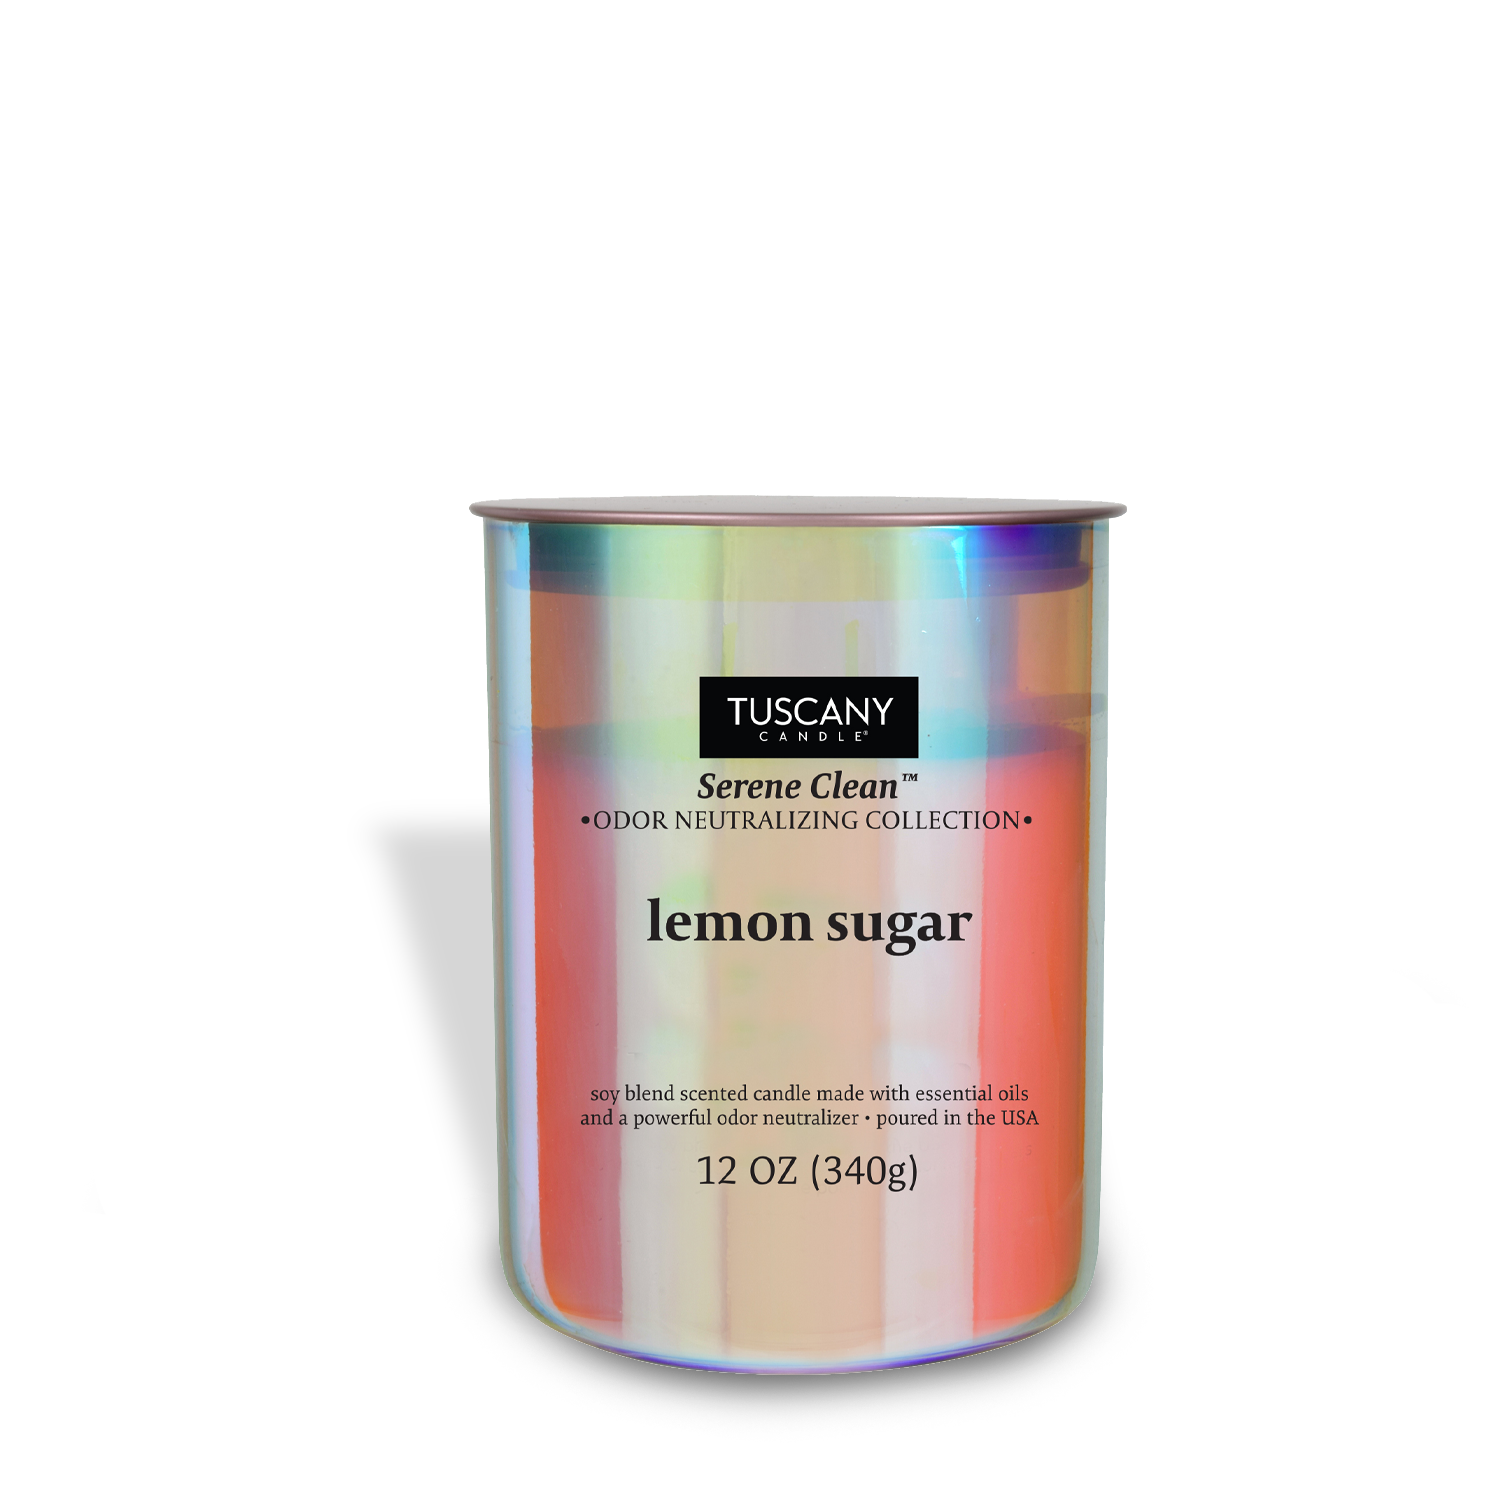 Lemon Sugar, a bright, refreshing scented cnadle from Tuscany Candle's Serene Clean® collection of odor-destroying scented candles